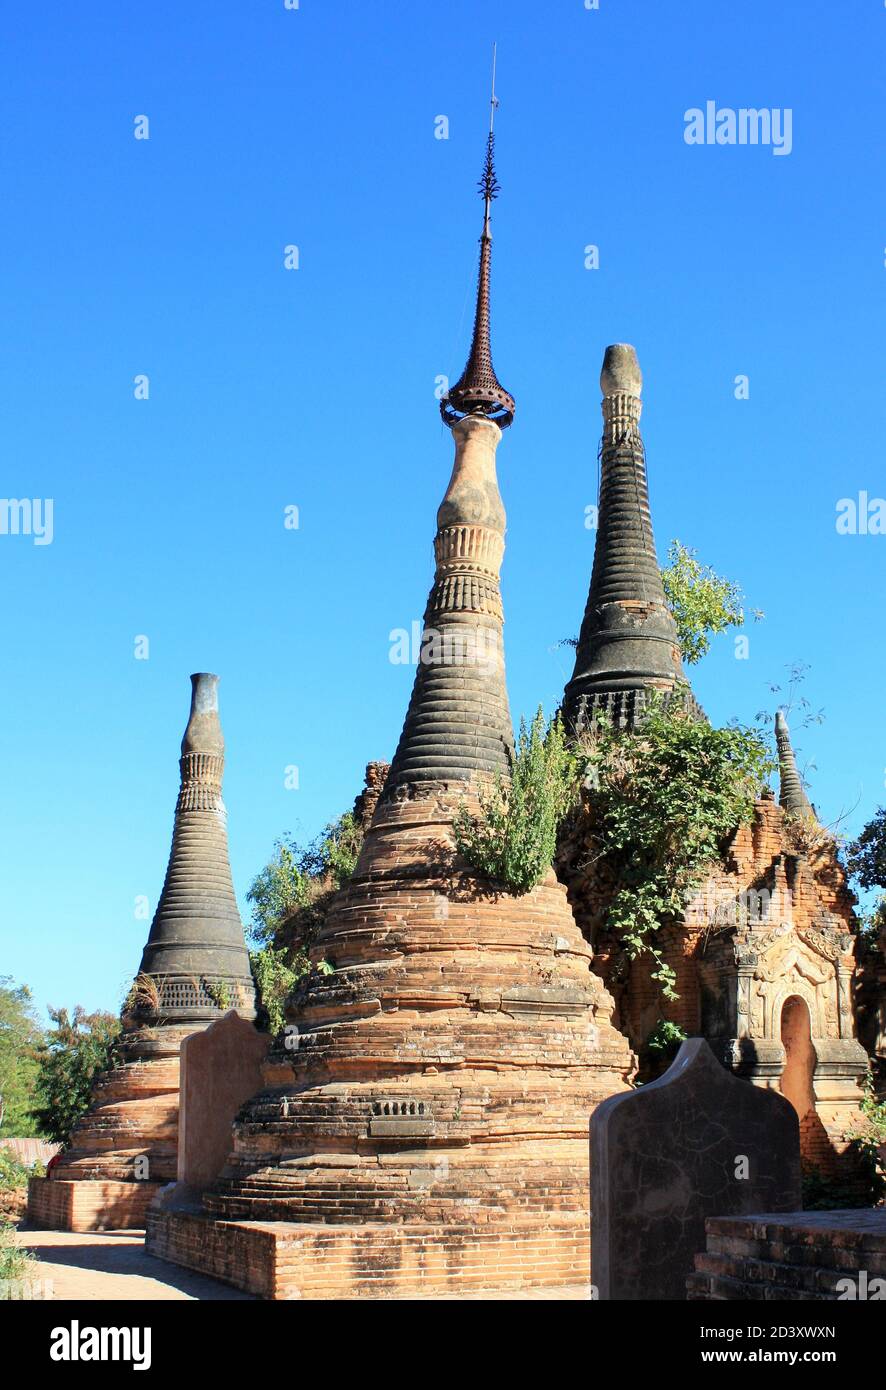 Ruins of old stone pagodas with green plants growing on them at In Dien located on the southwestern side of Inle Lake, Myanmar Stock Photo